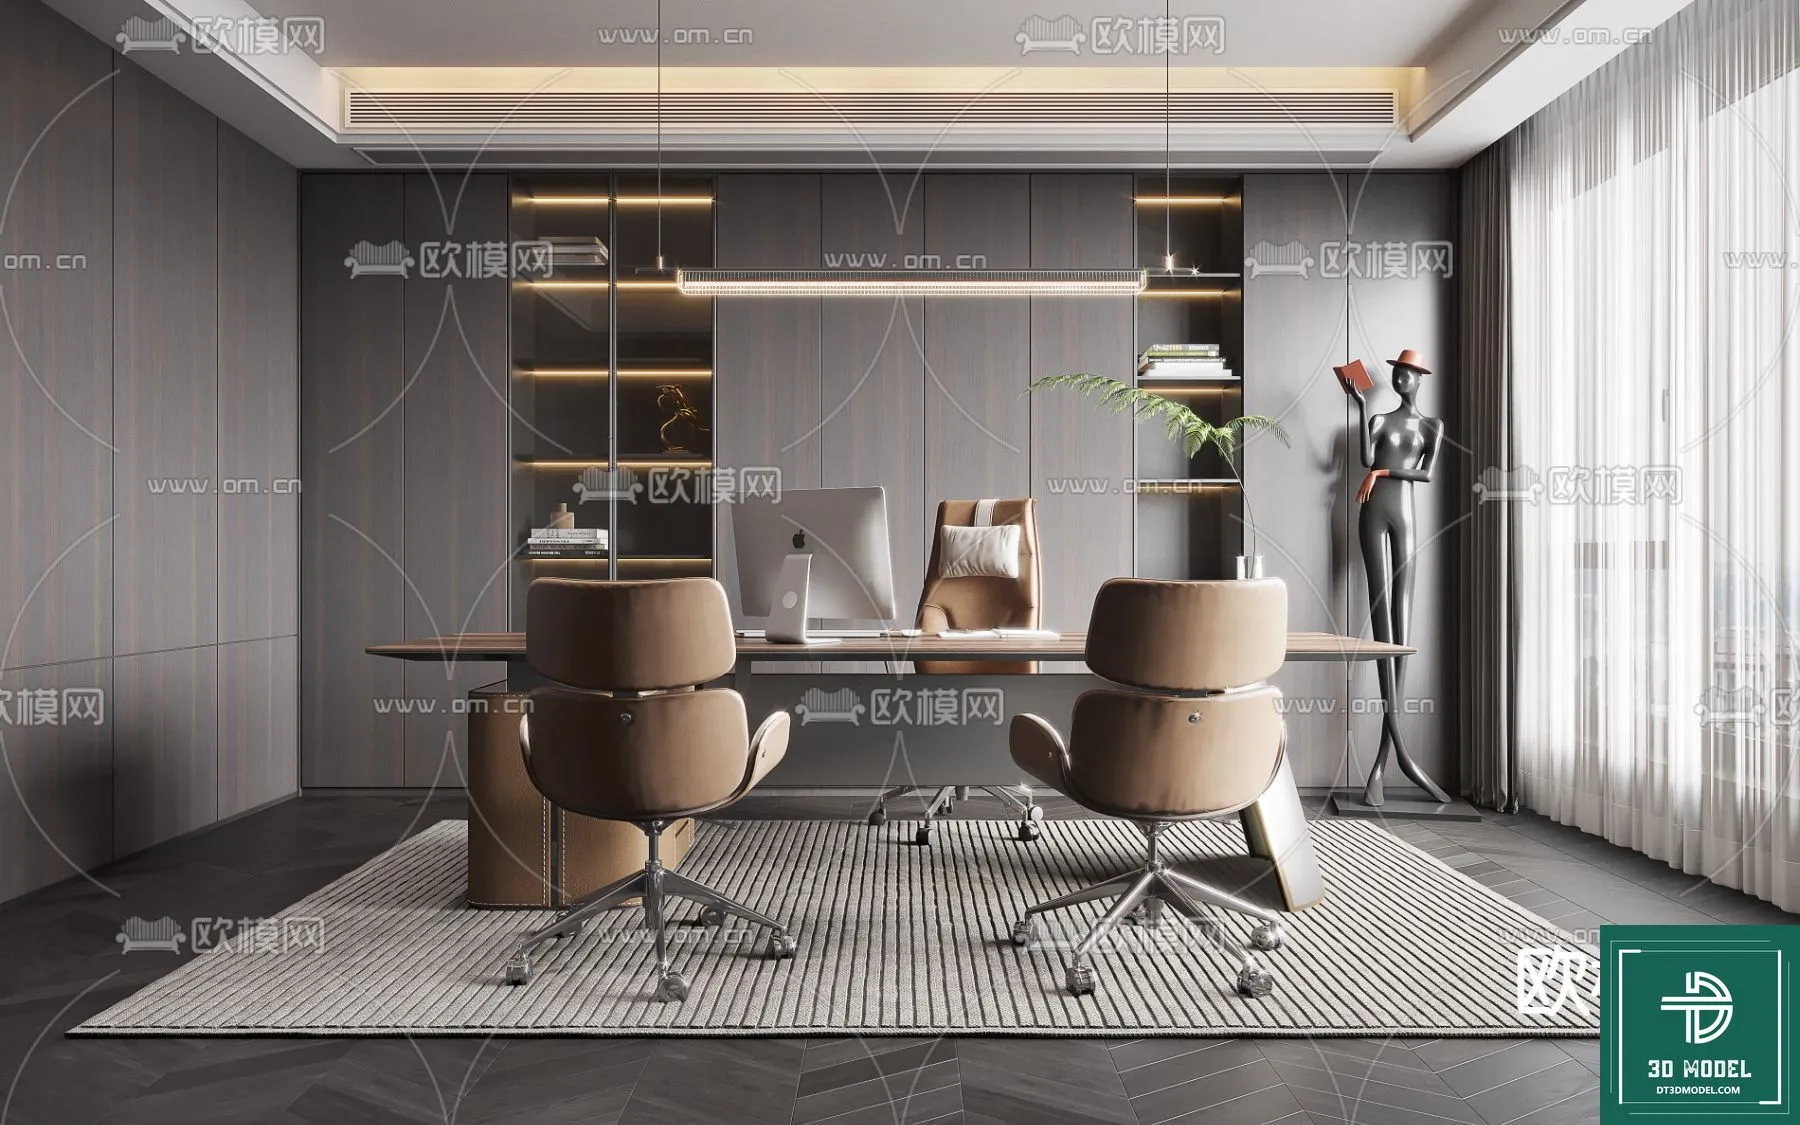 OFFICE ROOM FOR MANAGER – 3DMODEL – 060